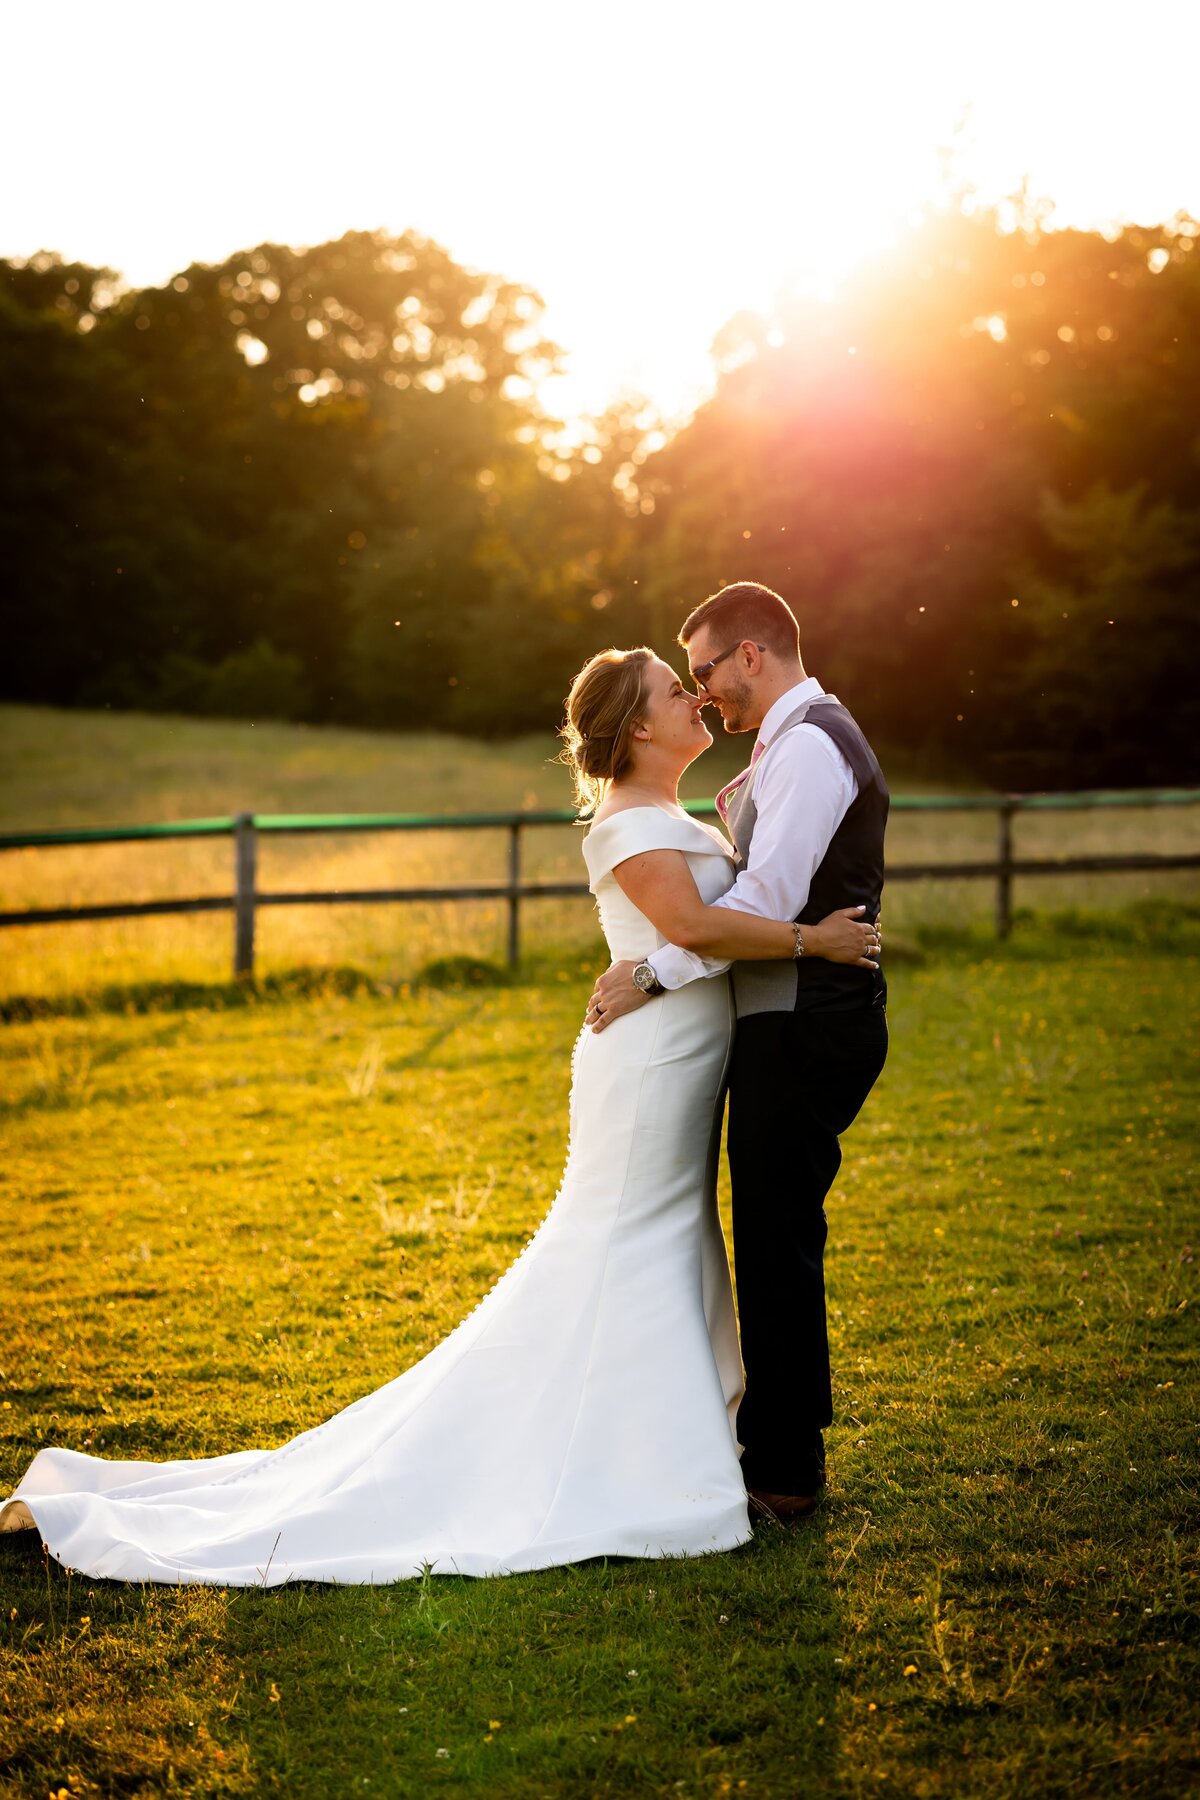 bride and groom in loving embrace in the sunset on wedding day